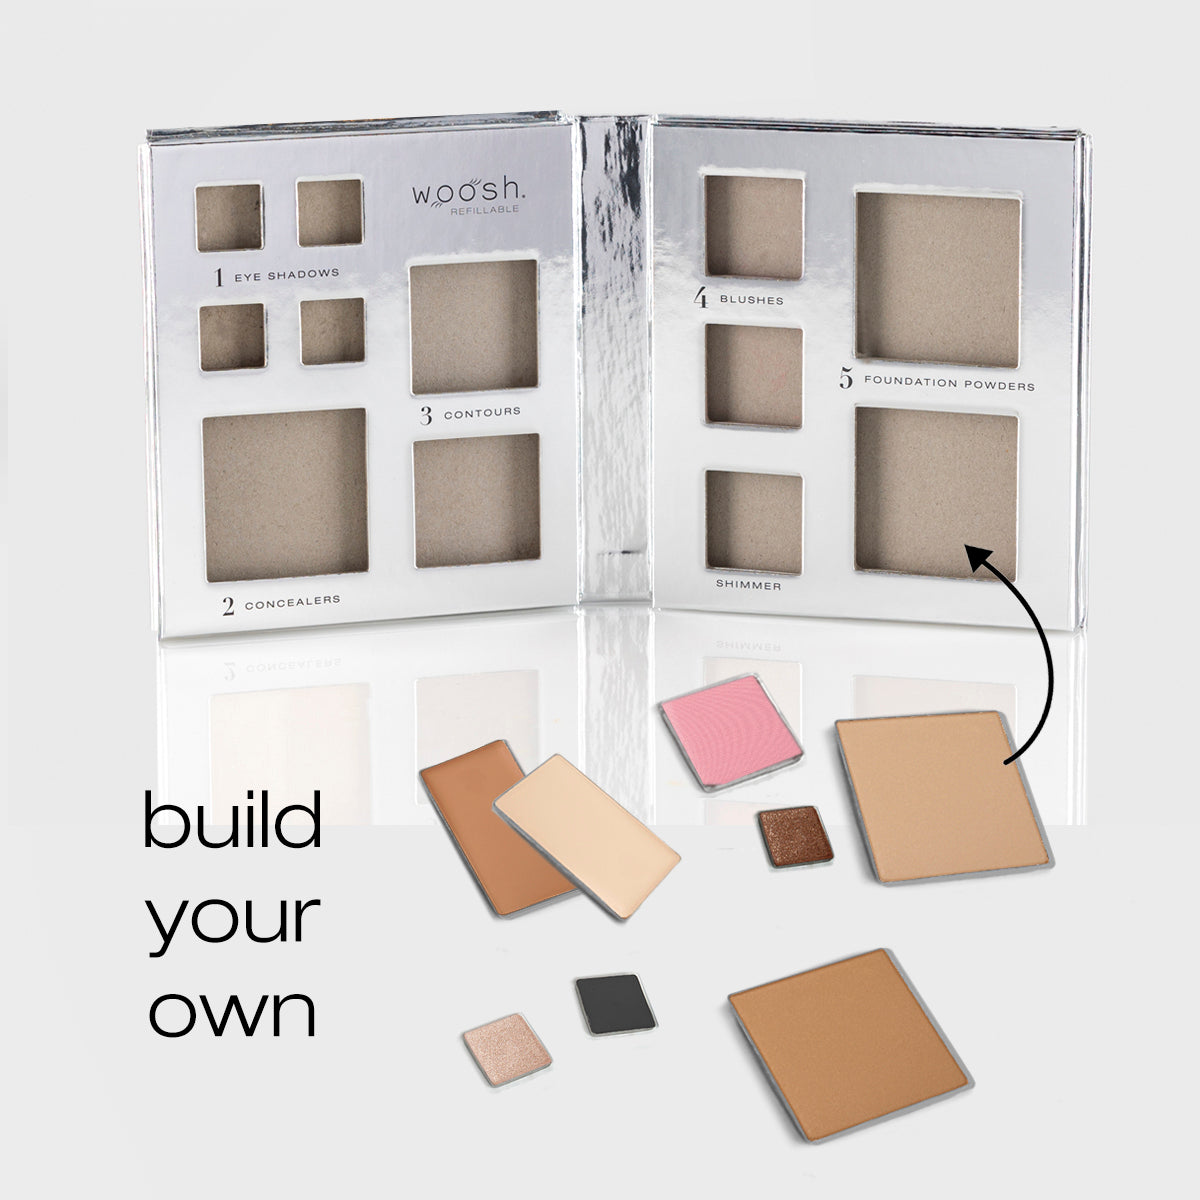 Build your own 13 pan palette with 4 eyeshadow pans, two concealer pans, 2 contour shades, 2 blushes, one shimmer, and 2 foundation powders to choose from